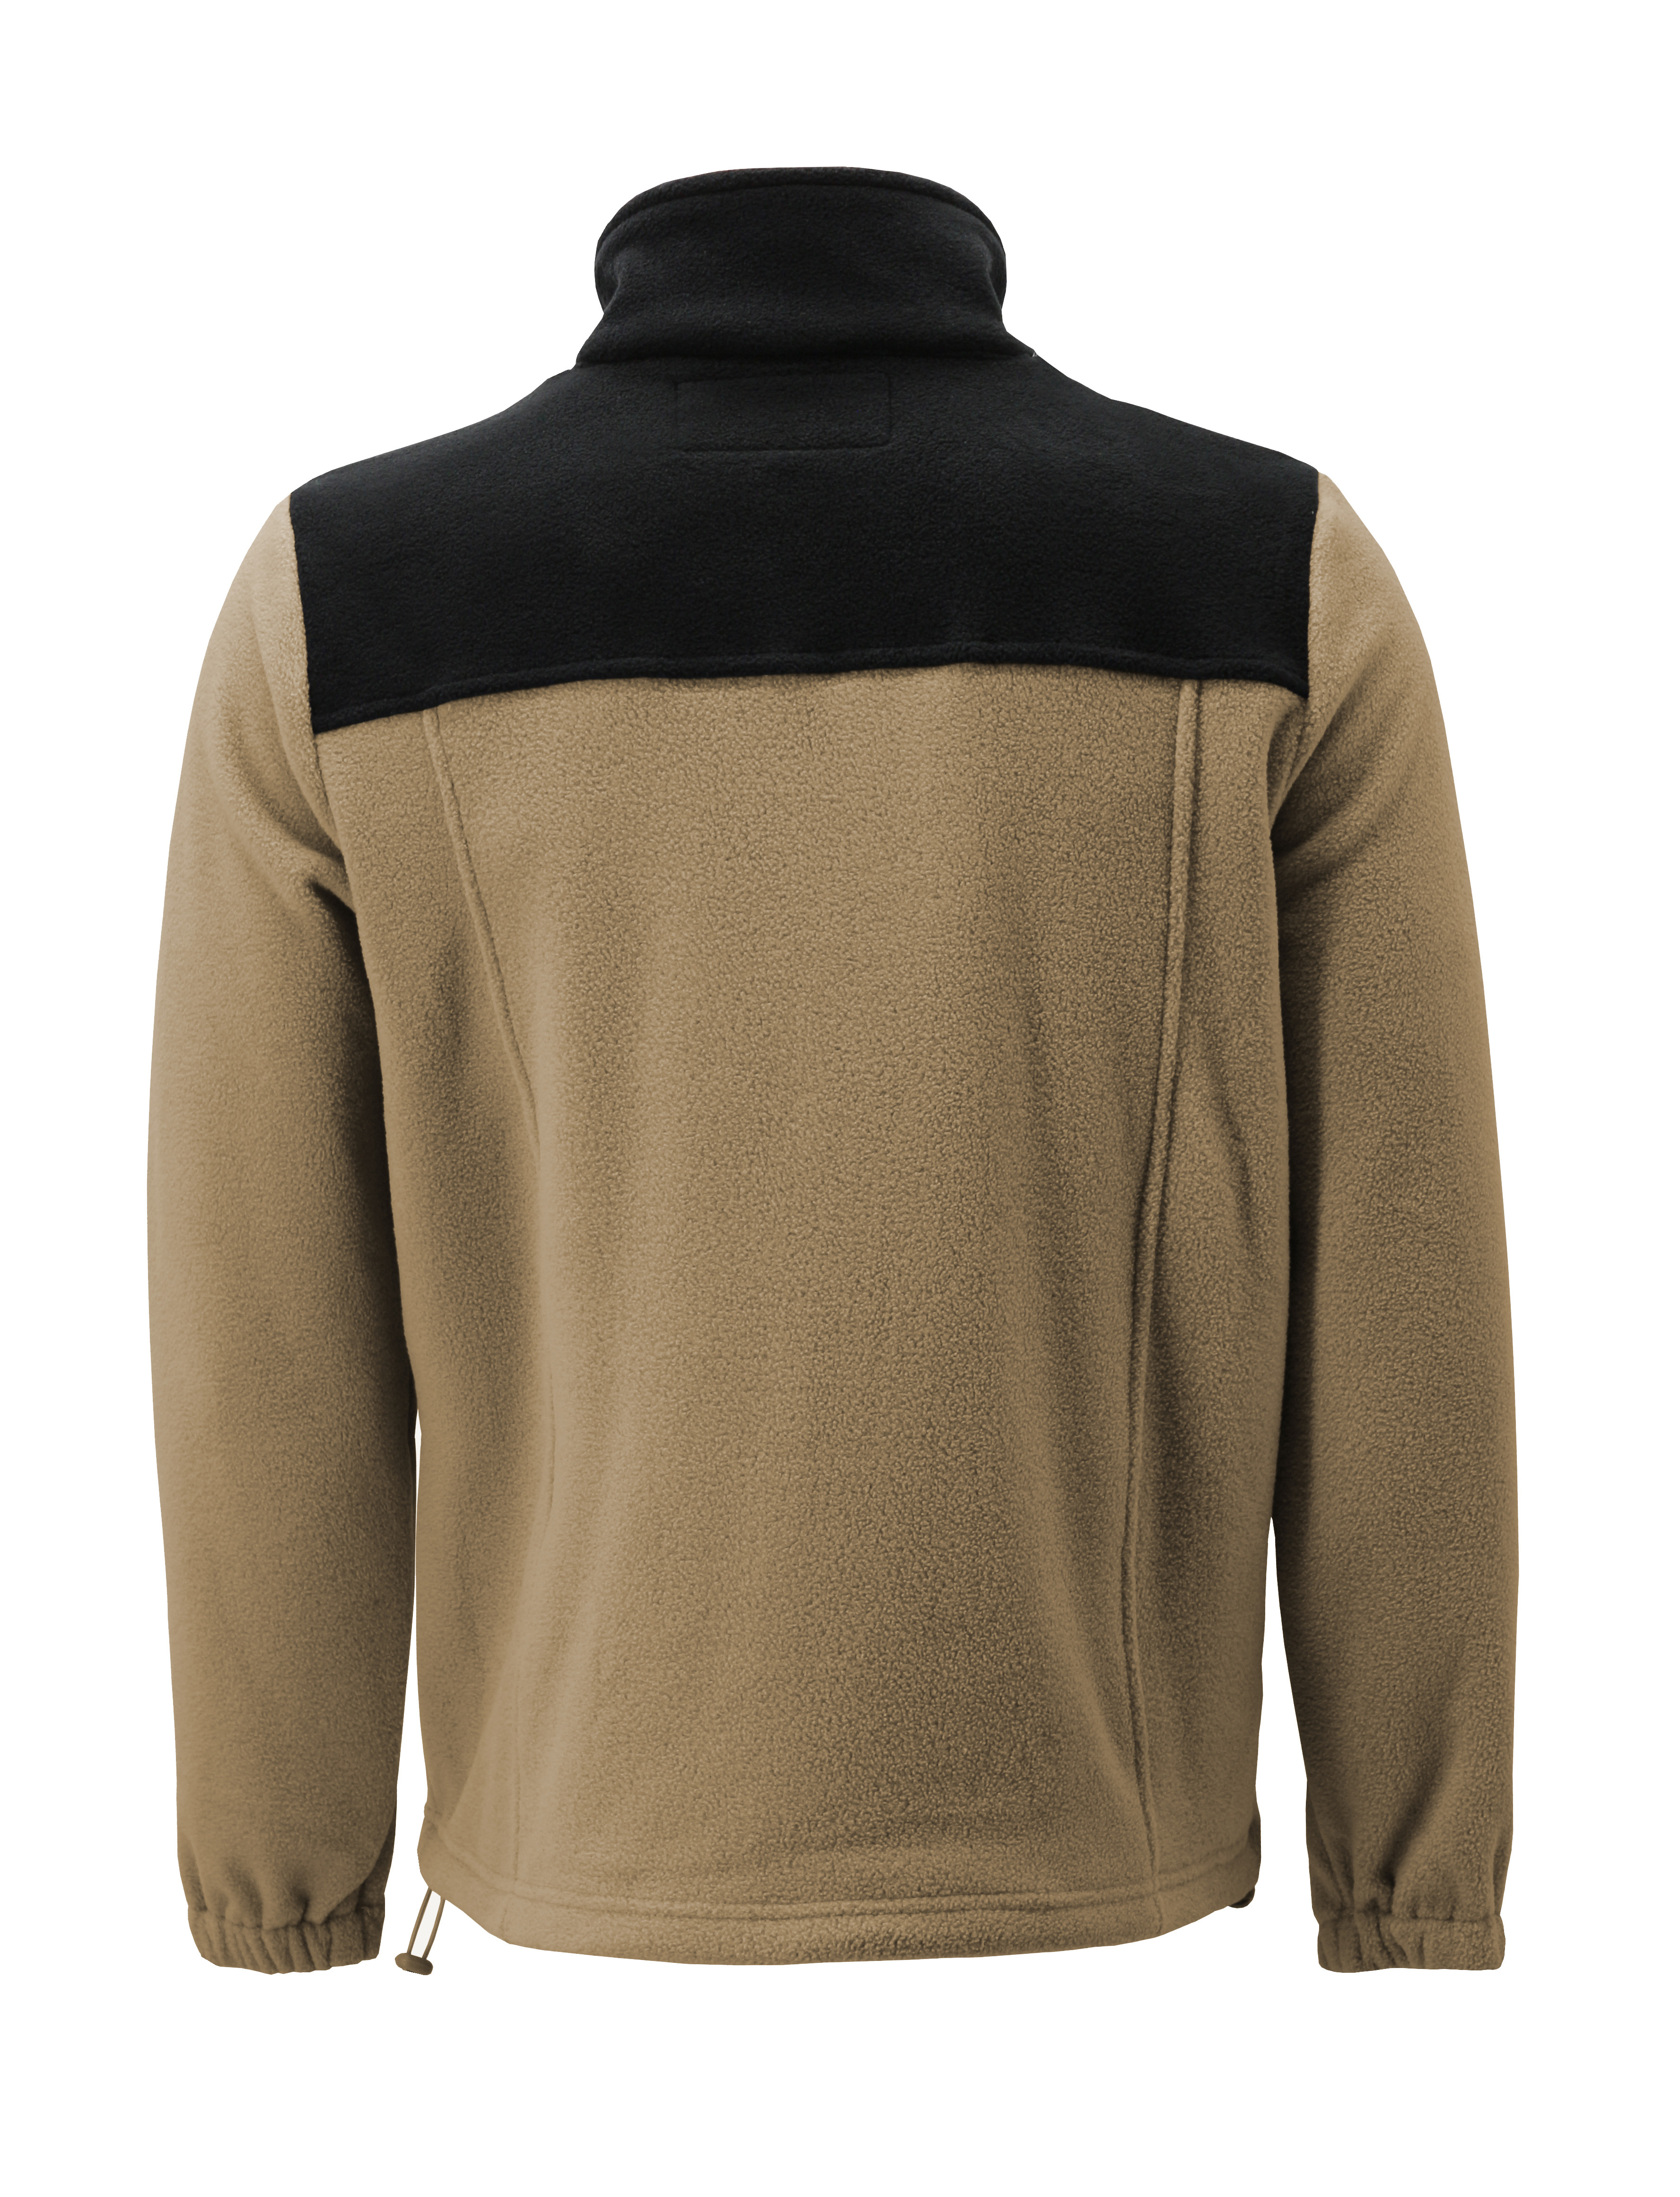 Men's Full Zip-Up Two Tone Solid Warm Polar Fleece Soft Collared Sweater Jacket (XL, LF35 #2) - image 2 of 3